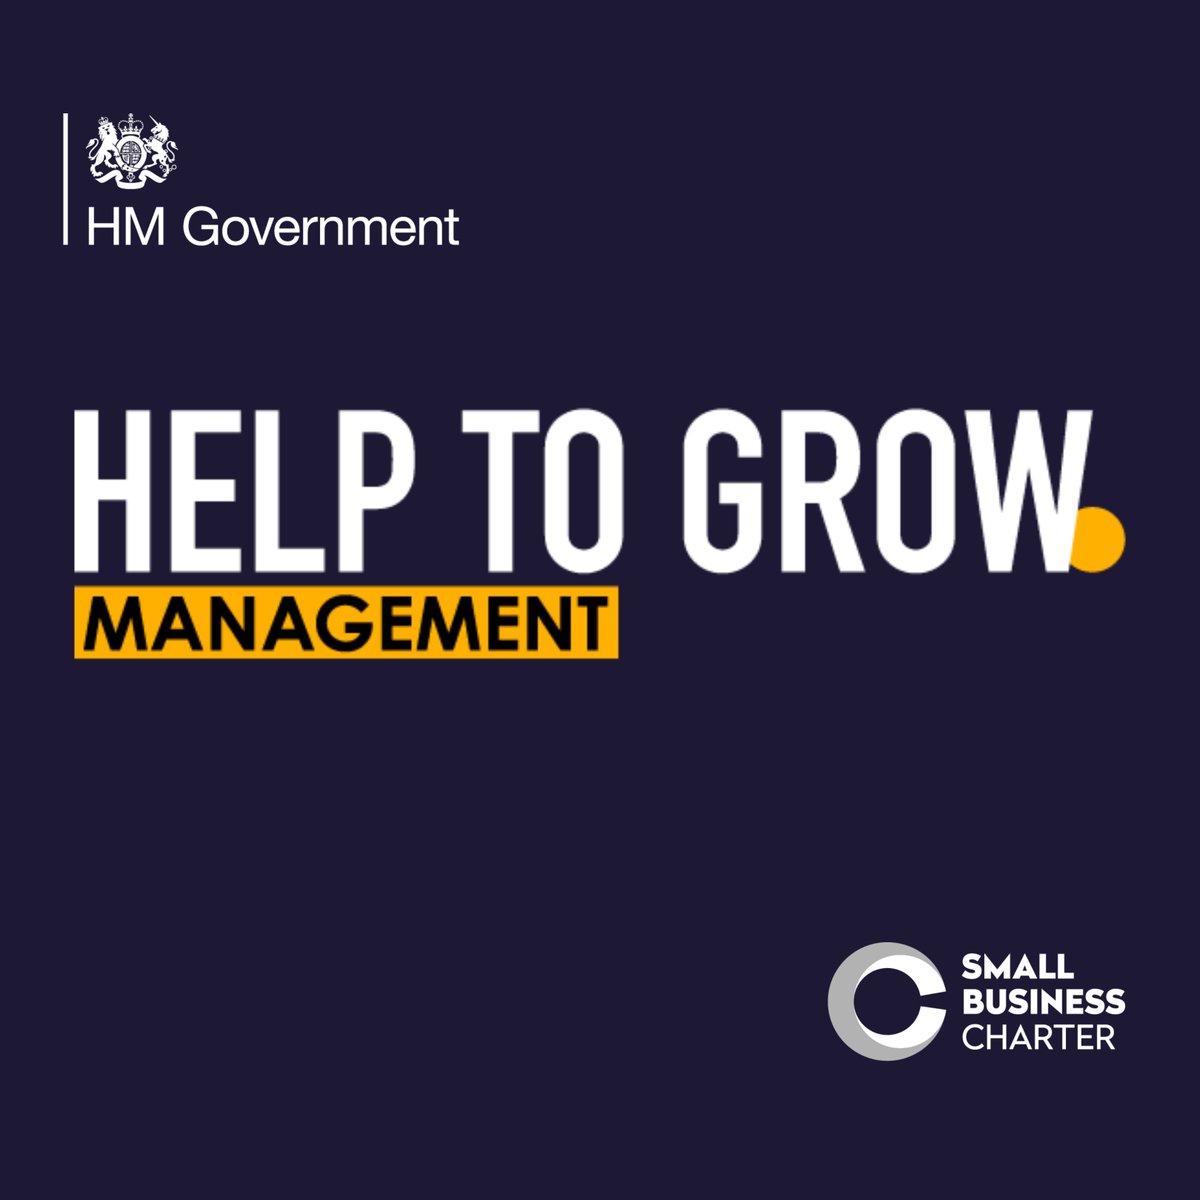 How can you make your business grow and develop?

Find out how at the Help to Grow course. Apply today - wakefieldfirst.com/academic-partn…

#Wakefield #WestYorkshire #Yorkshire #BusinessSupport #BusinessGrowth #HelpToGrow #Manager #Management #Training  #Train @SmallBizCharter